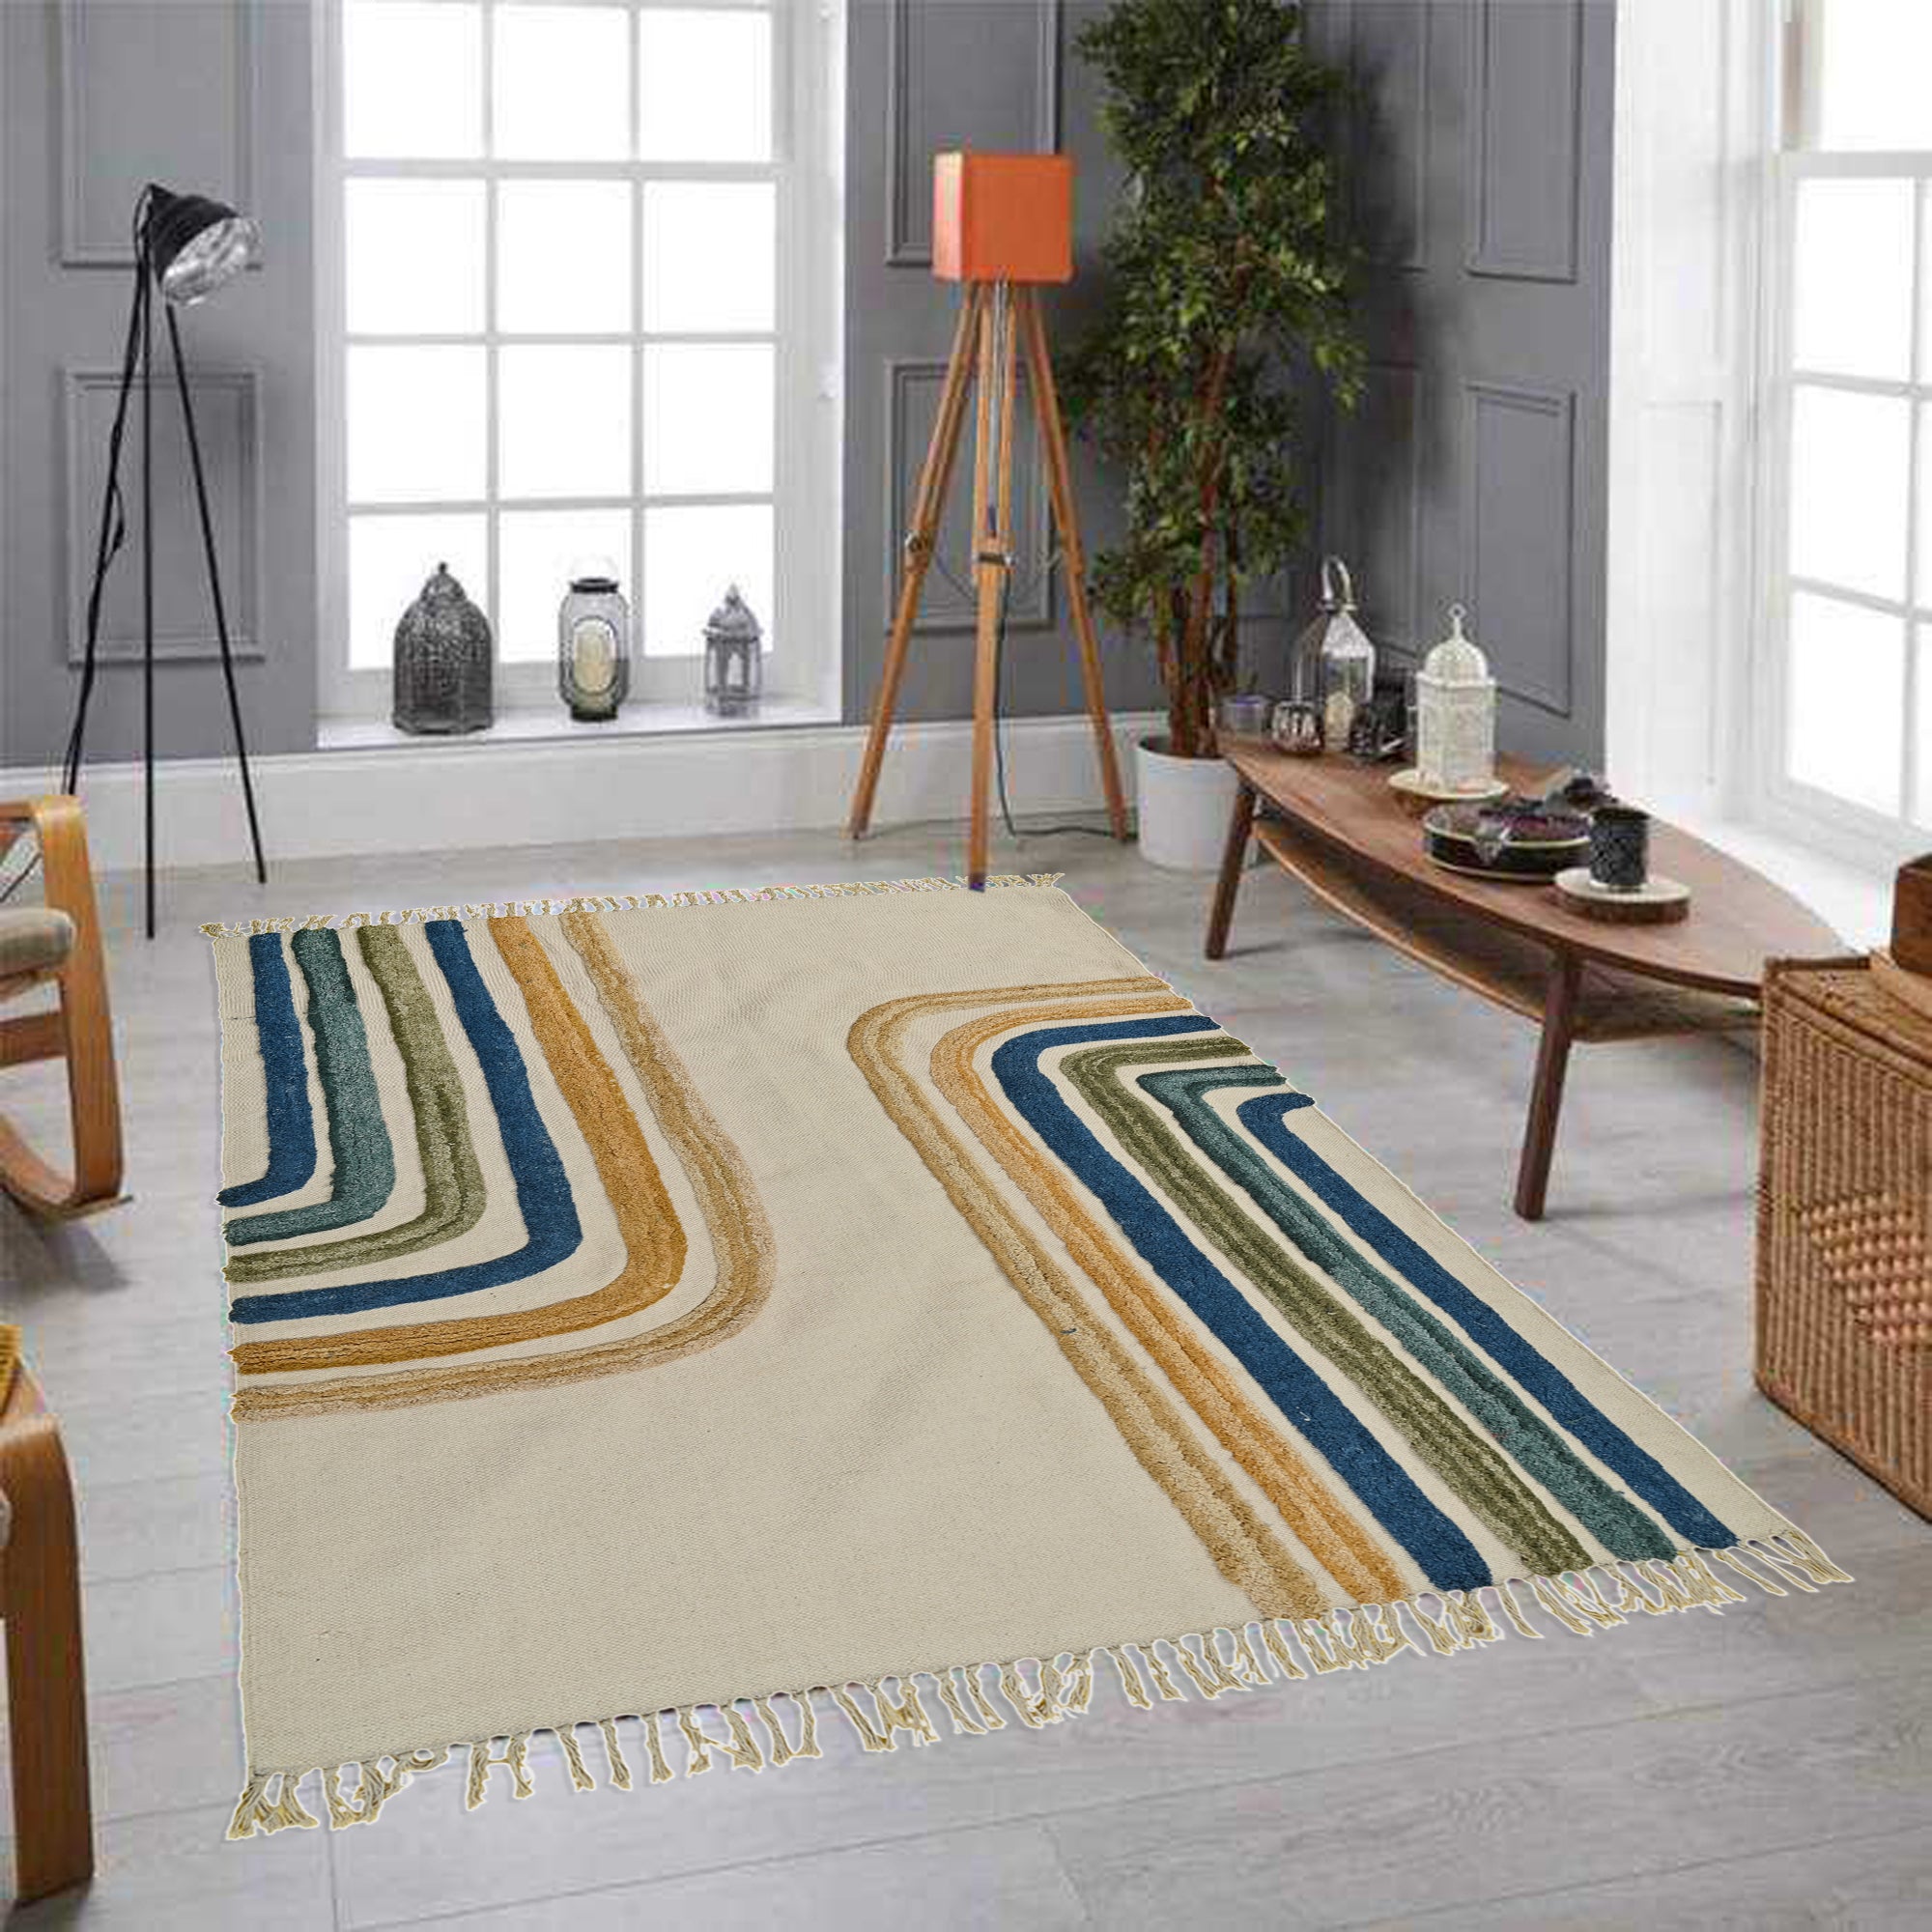 DEPOT HAND EMBROIDERED COTTON RUG - ART AVENUE